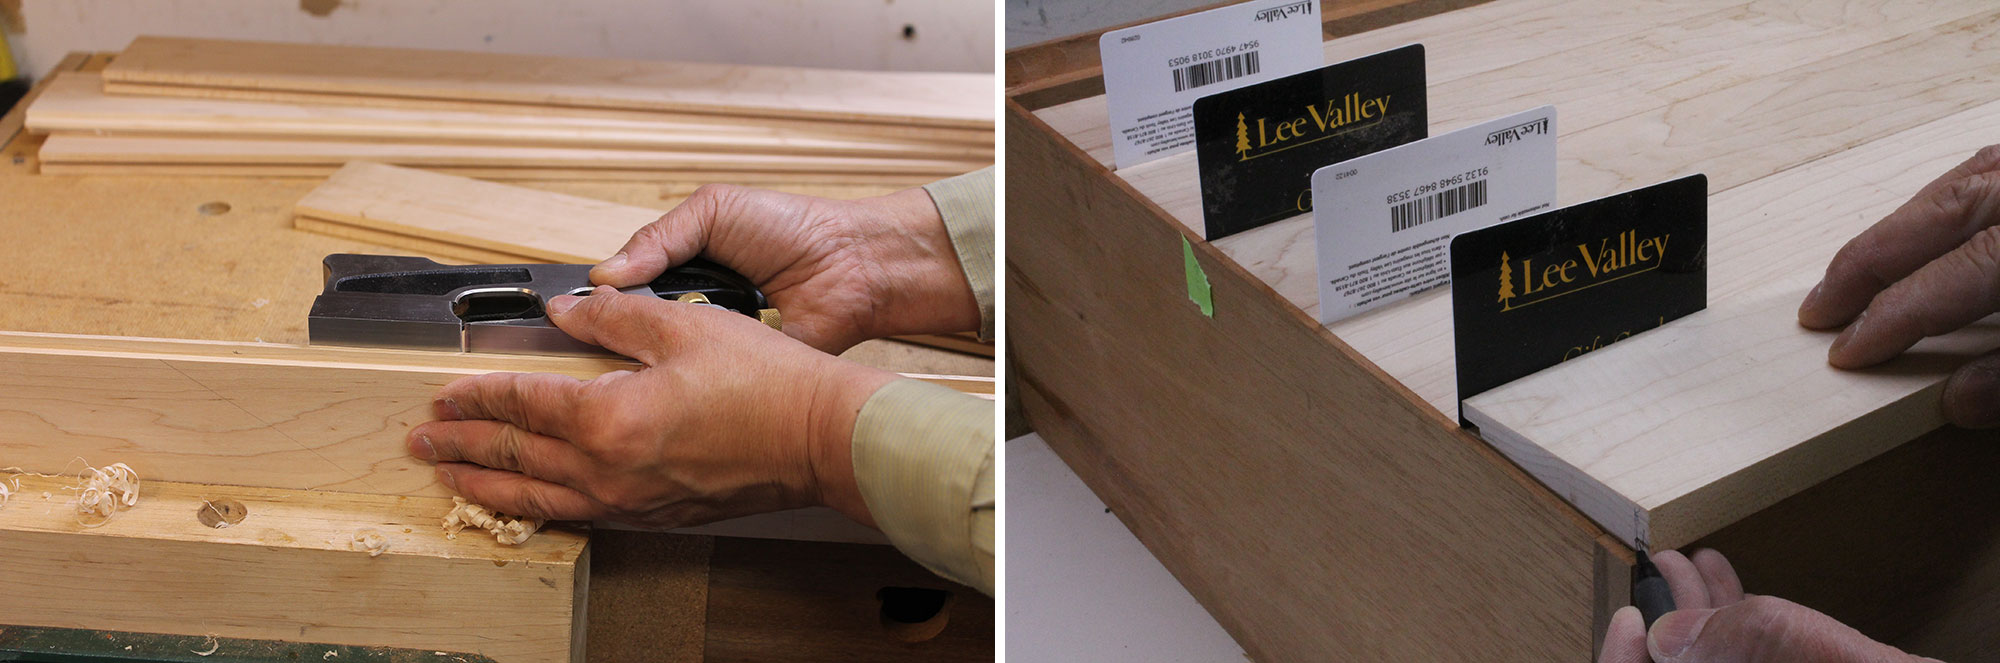 Image left: Using shoulder plant to fix  tight spots. Image right: Boards spaced apart to mark ends for trimming.